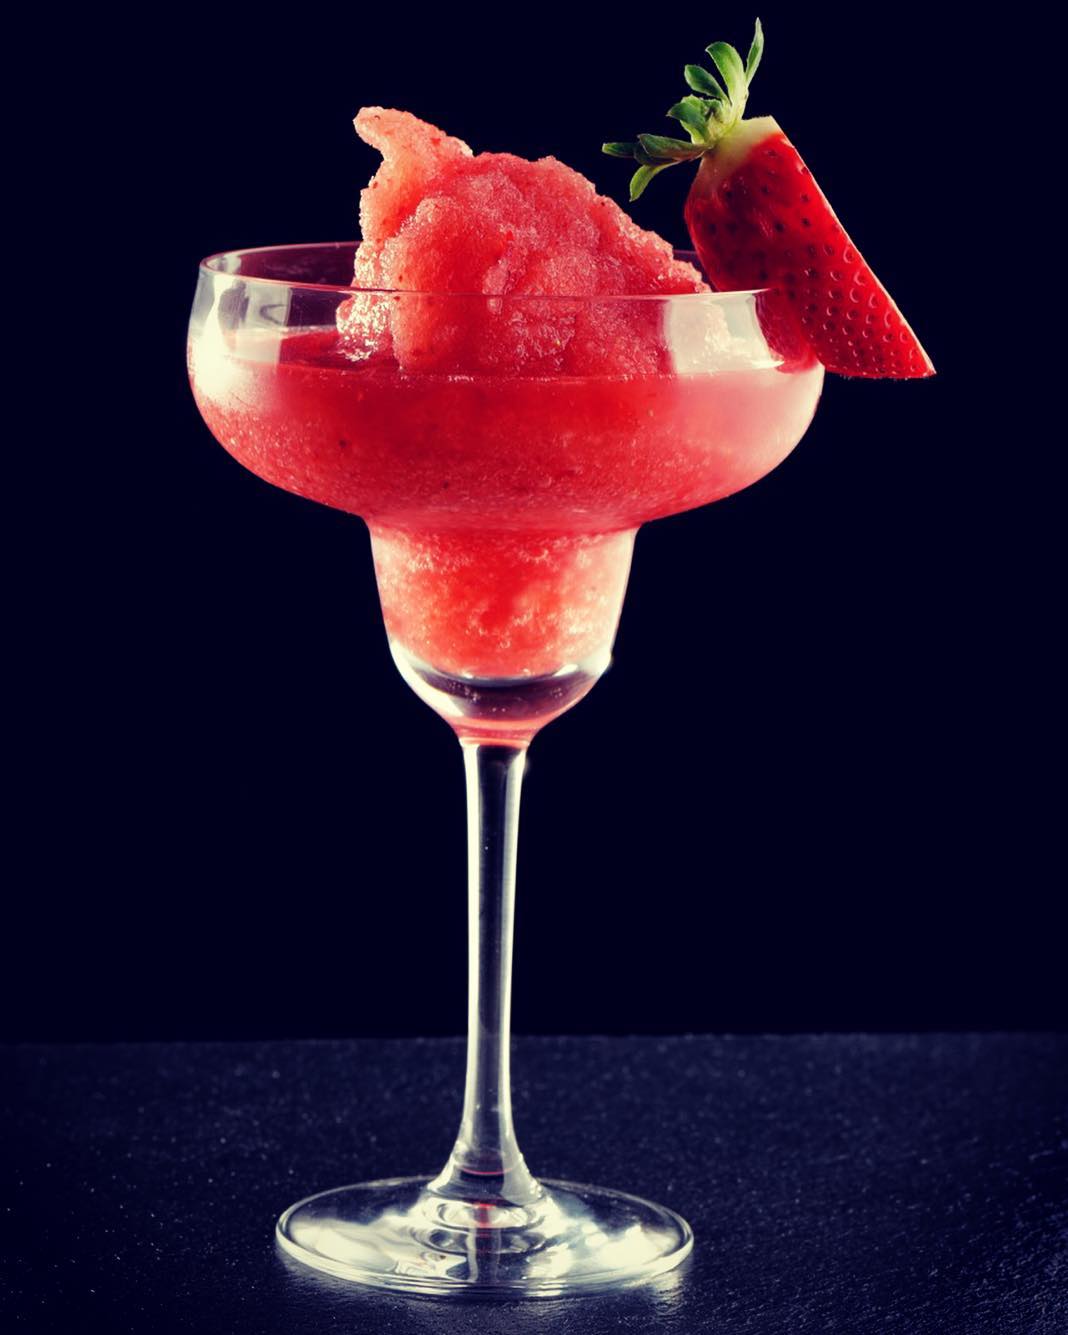 Ahhhh frozen strawberry daiquiri - one of our absolute favorites this summer. Interested in this specific flavour or other summer flavours? Contact our WIN:LAB directly via our website. See link in bio #yournordicflavourhouse #whenspeedandtastematter #natuREimagined #nordicbynature #tasty #taste #flavor #flavour #summer #drink #cocktail #strawberry